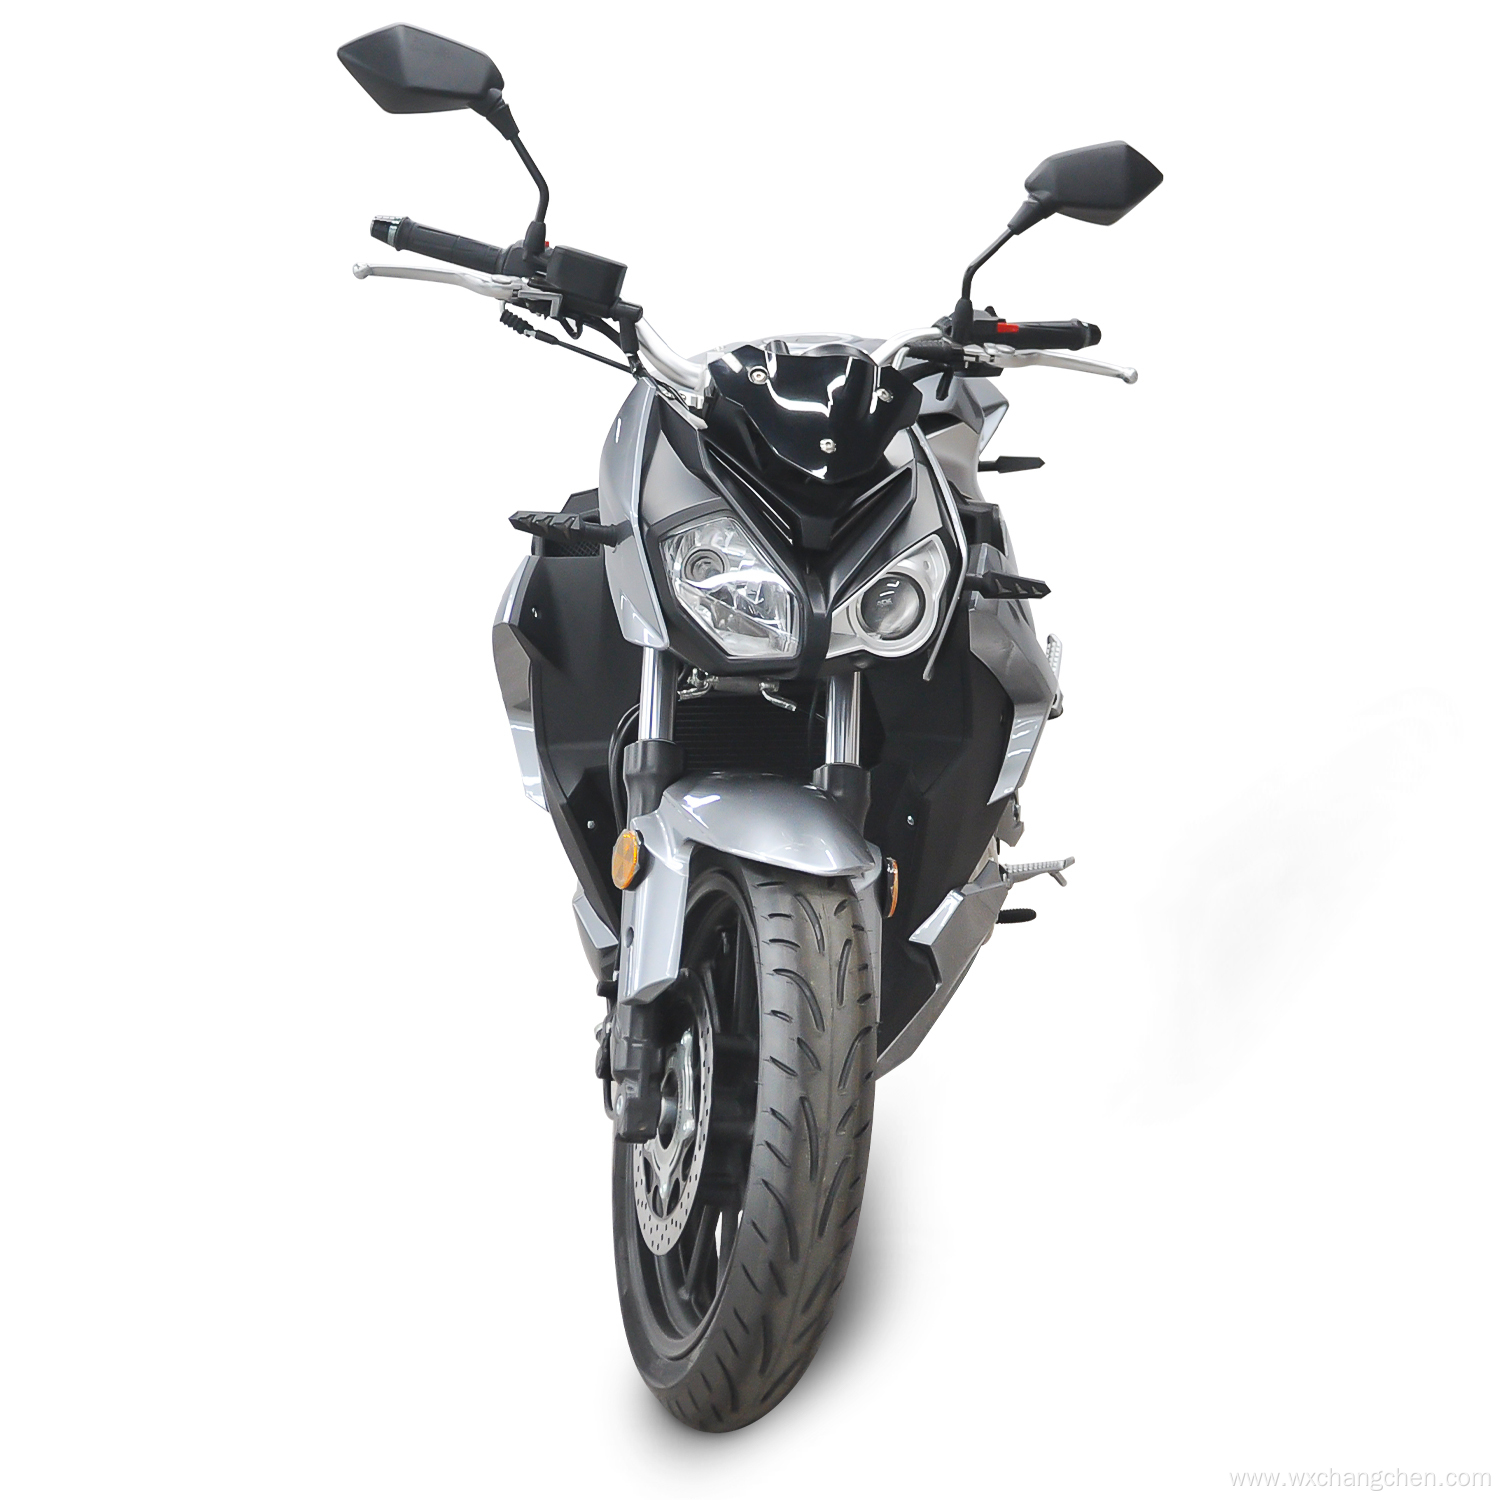 hot selling racing heavy bikes other sport gasoline motorcycle 200cc 400cc petrol Motorcycles